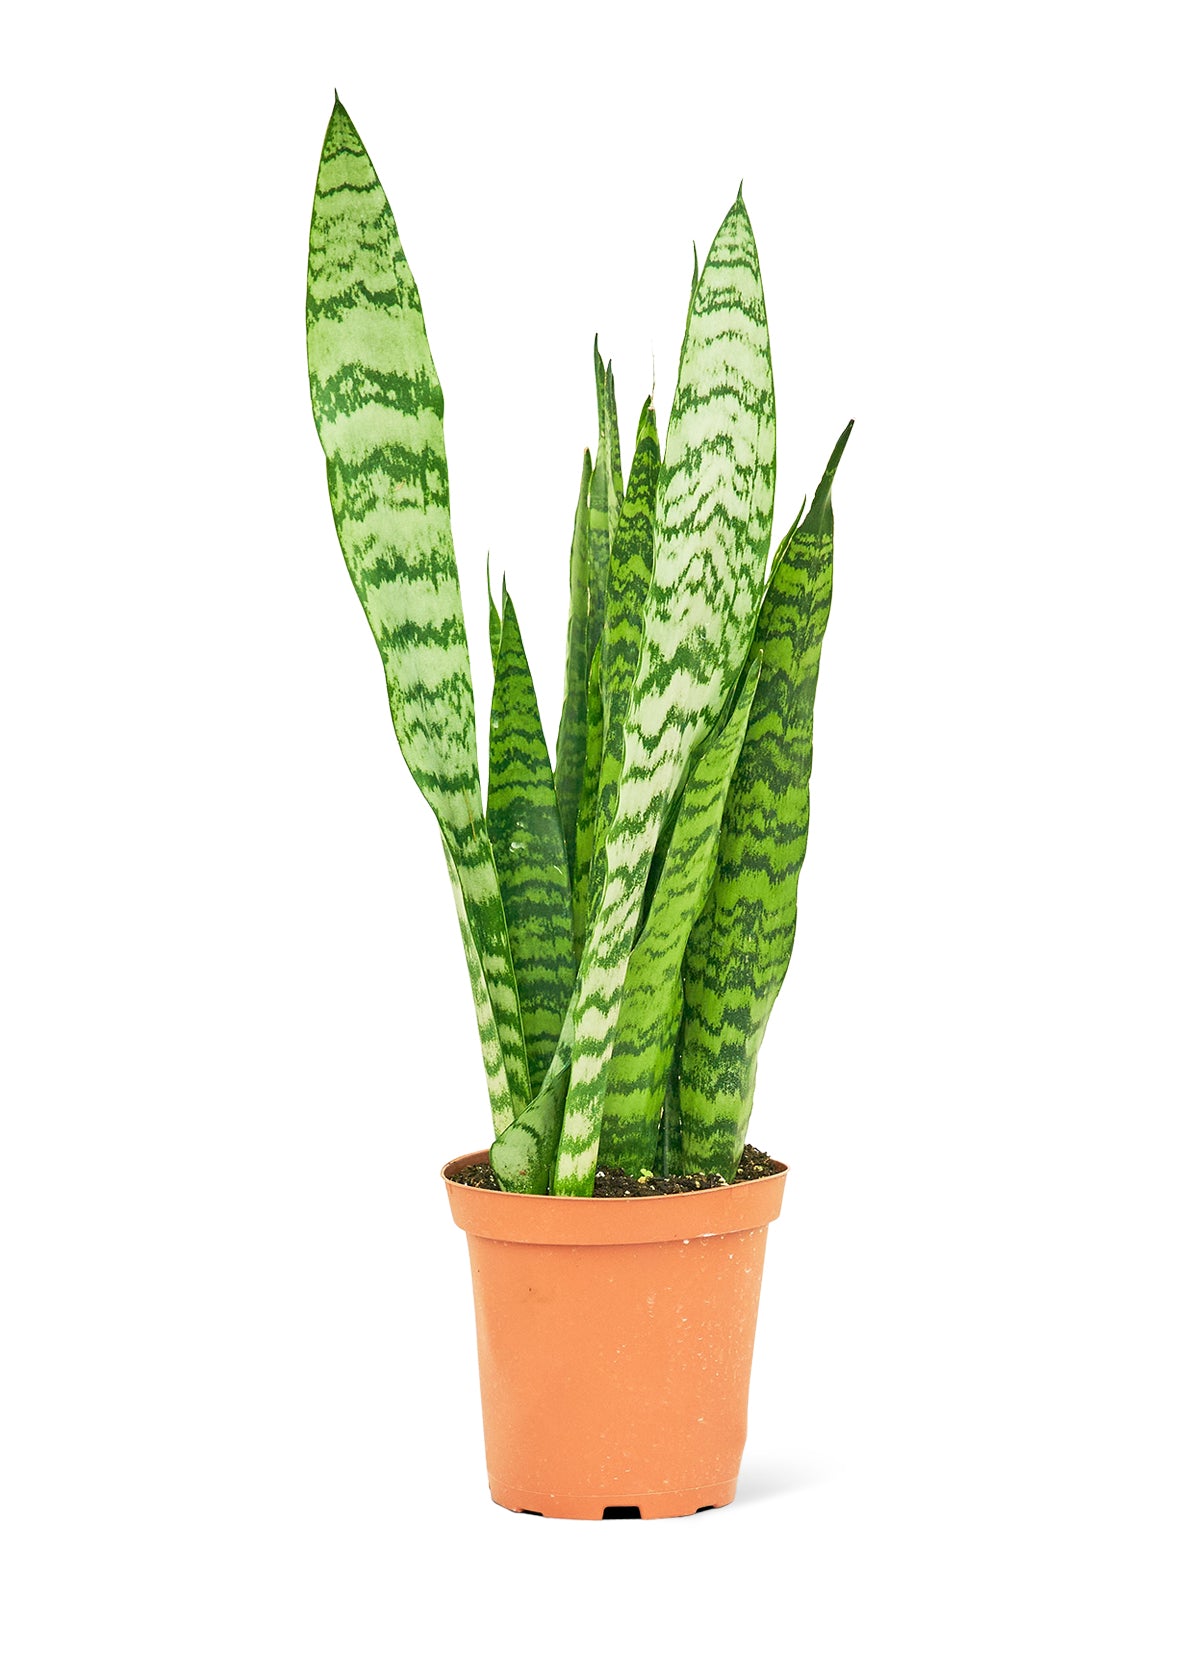 Medium size Zeylanica Snake Plant in a growers pot with a white background